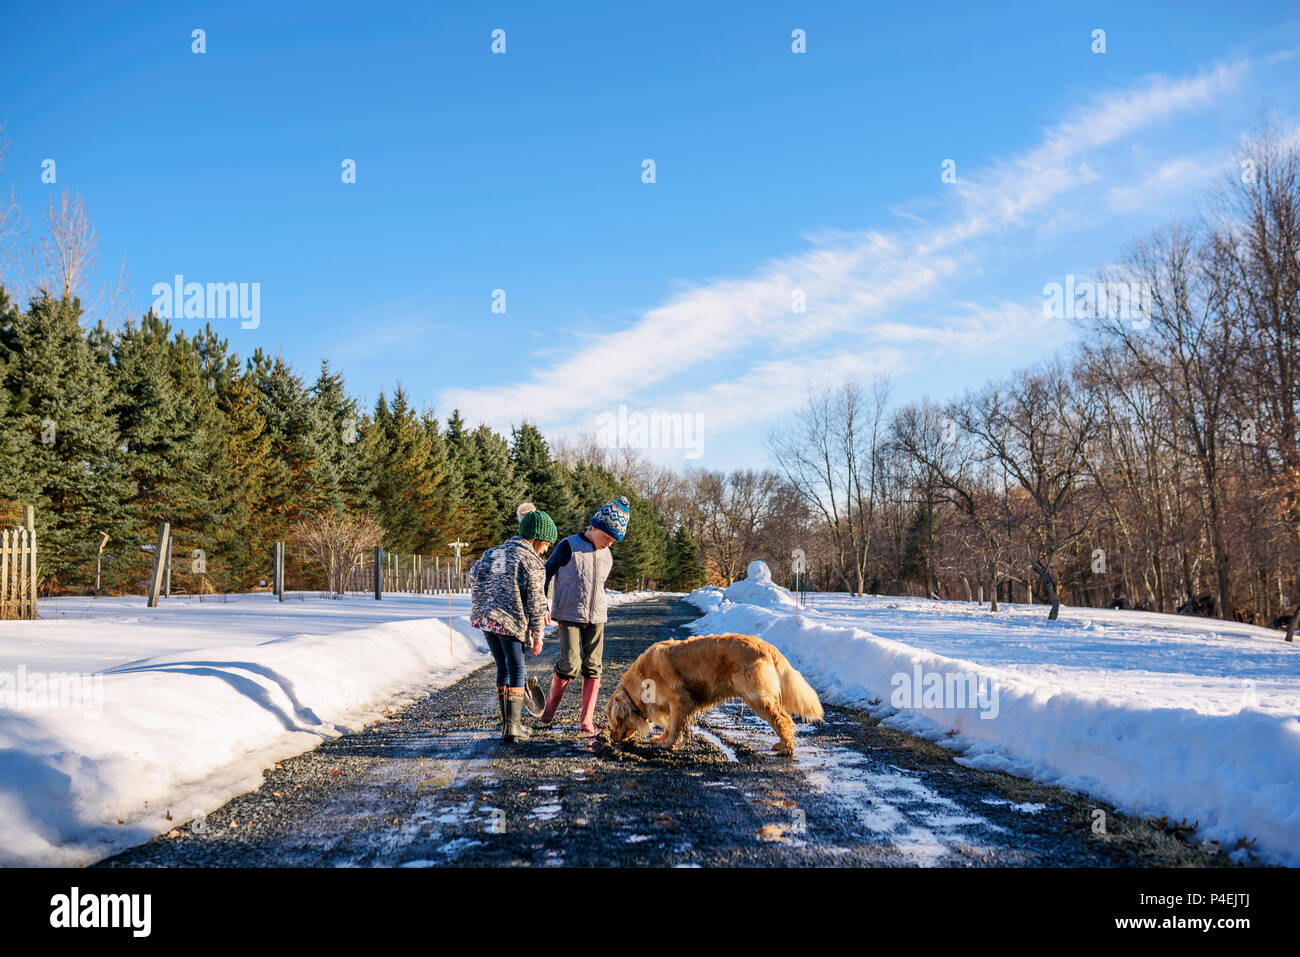 Two children playing in snow with their golden retriever dog Stock Photo